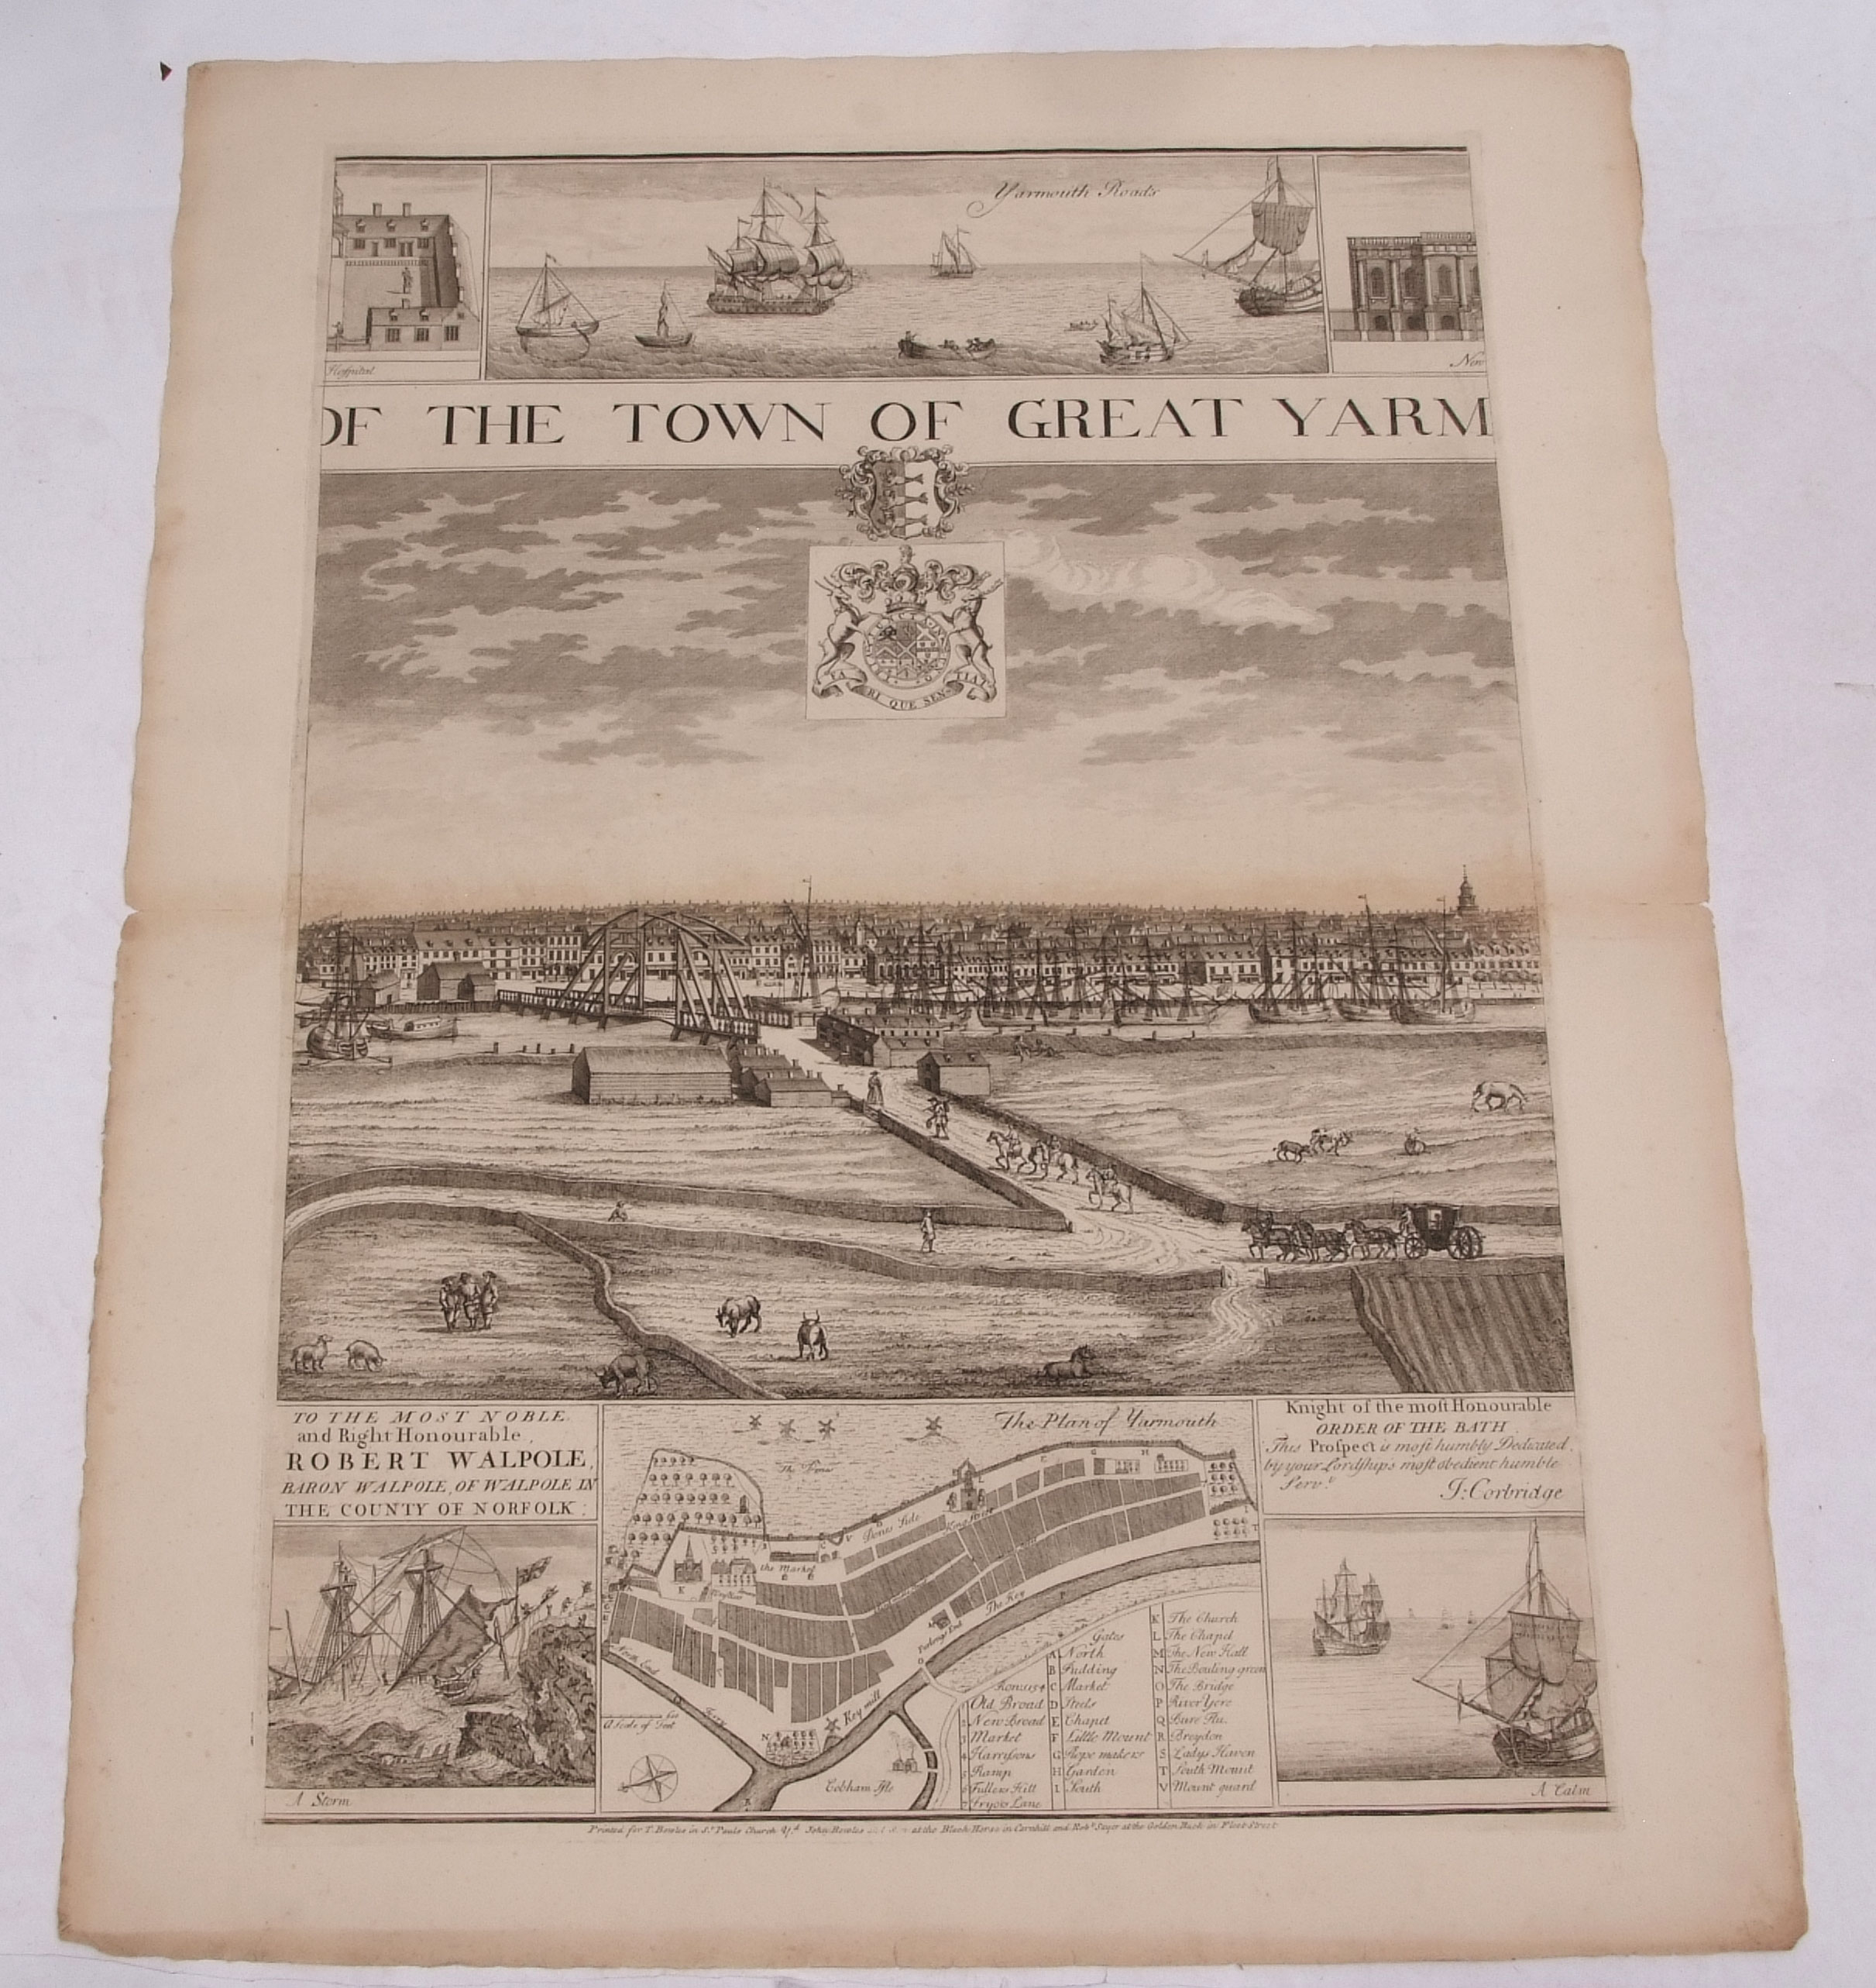 J CORBRIDGE: THE WEST PROSPECT OF THE TOWN OF GREAT YARMOUTH IN NORFOLK, engraved panoramic - Image 3 of 3